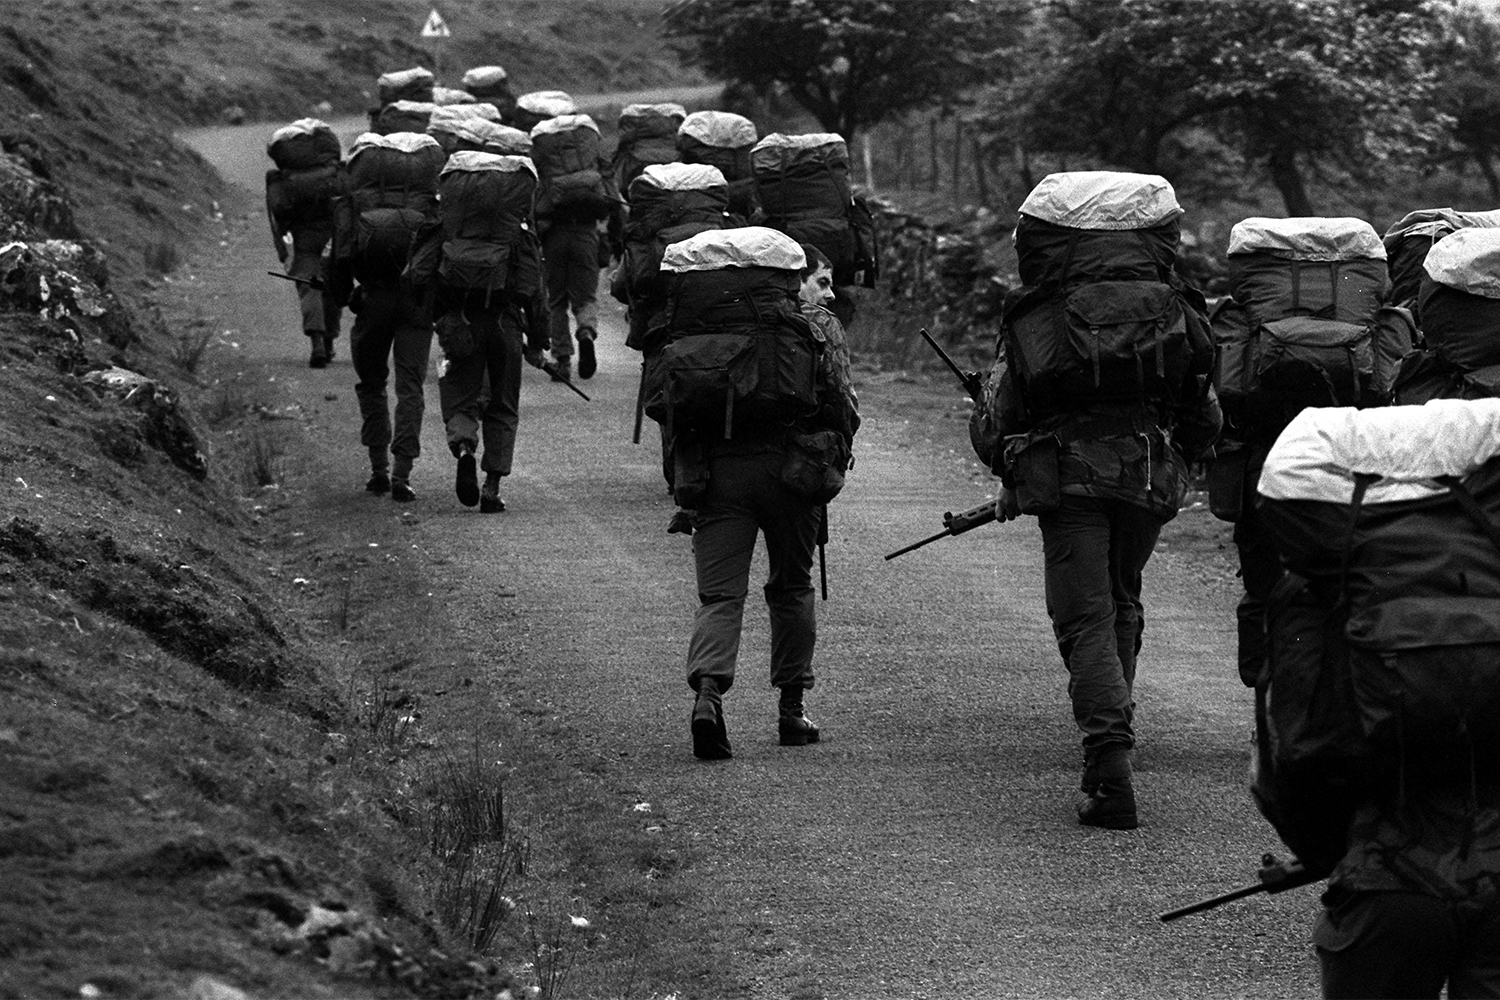 Recruits with 45 lb backpacks and 10 lb FN rifles walk to the top of a mountain before the official start of an endurance march across country because the track is too steep for an Army truck. Allegedly, a recruit who ate a 1lb chocolate bar, making his pack lighter, was made to carry a 2 lb rock instead.